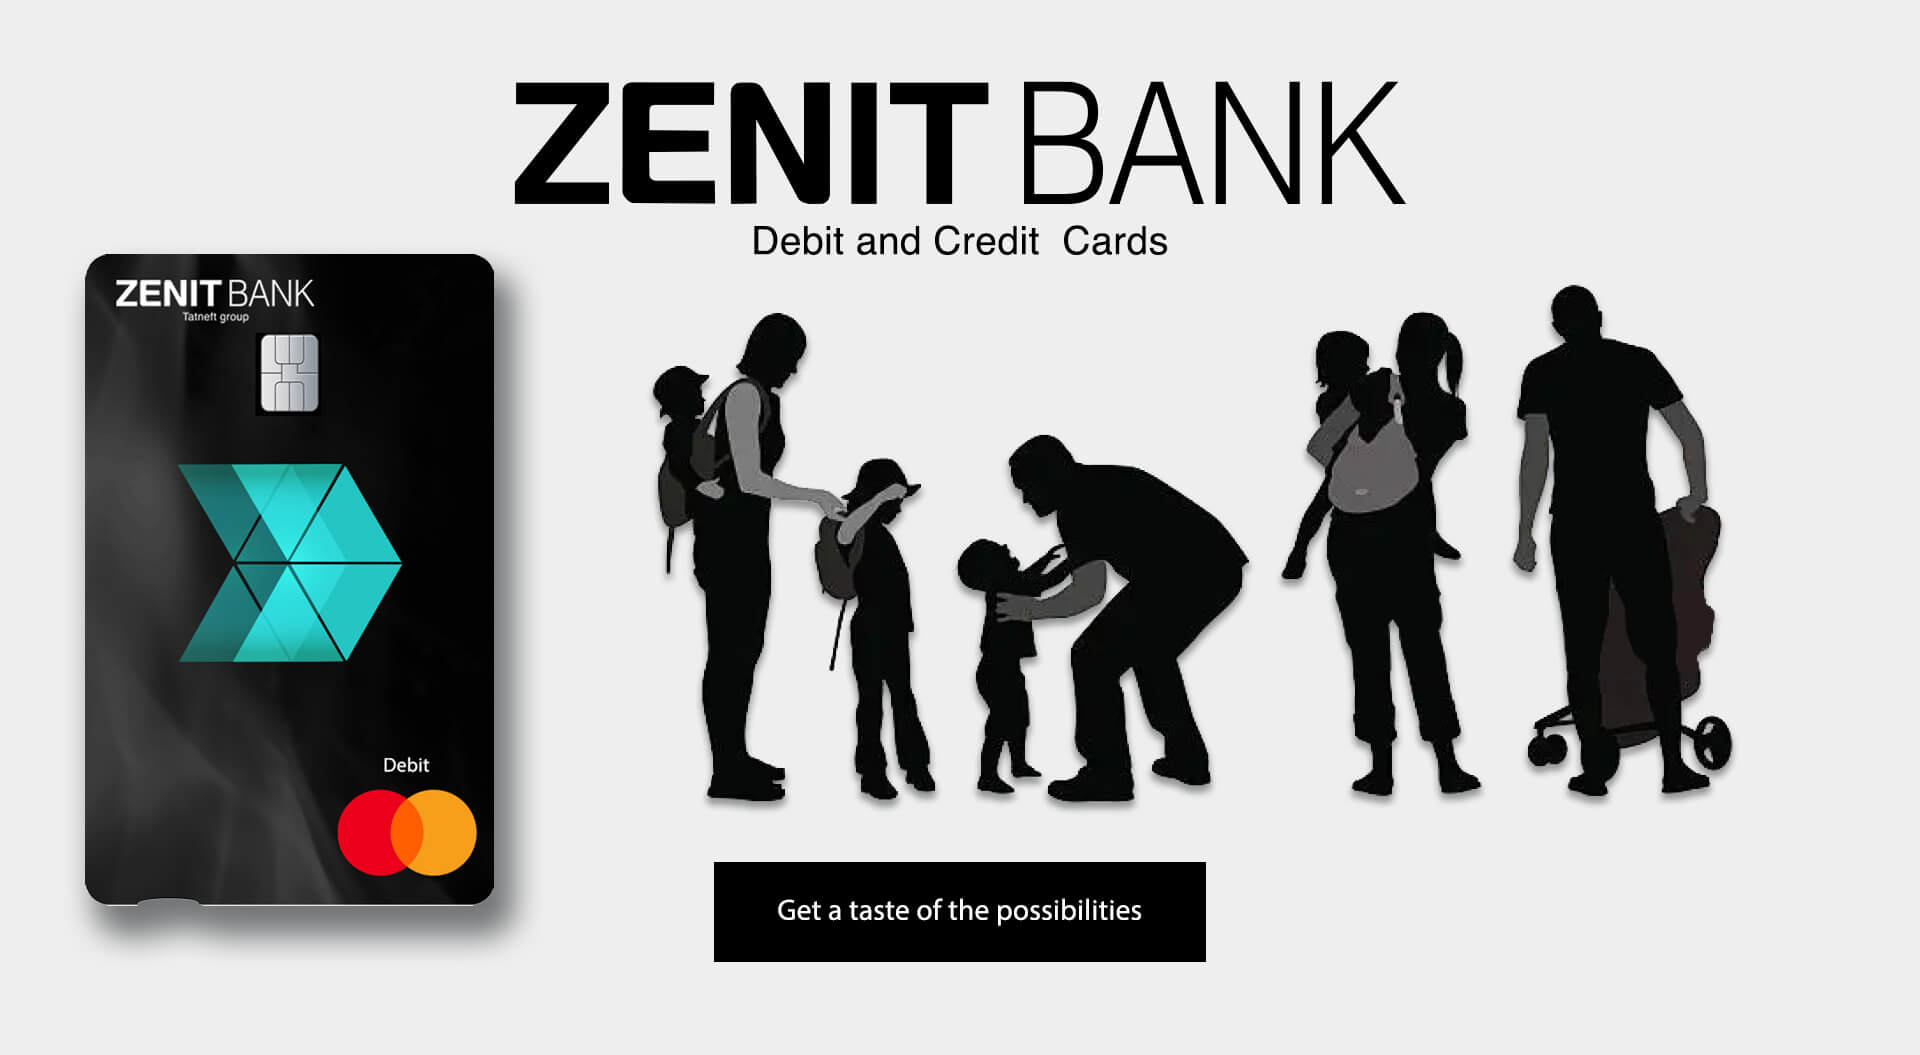 Zenit Bank Russia, Credit and Debit Card Design, Retail Brand Identity, Graphic Communications - CampbellRigg Agency